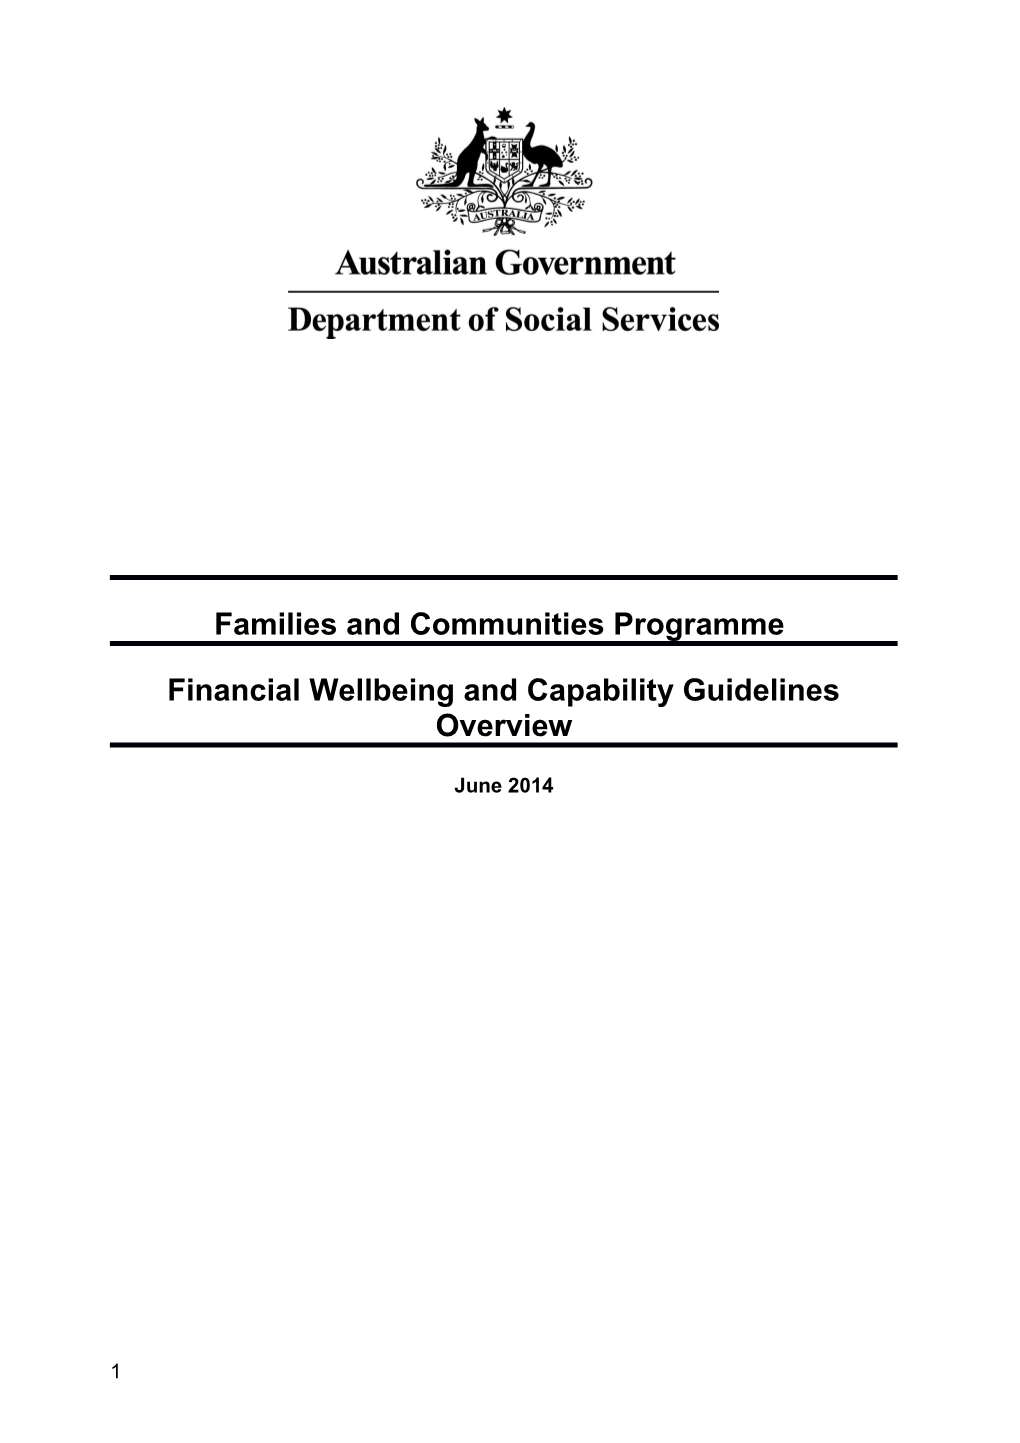 Financial Wellbeing and Capability Programme Guidelines Overview